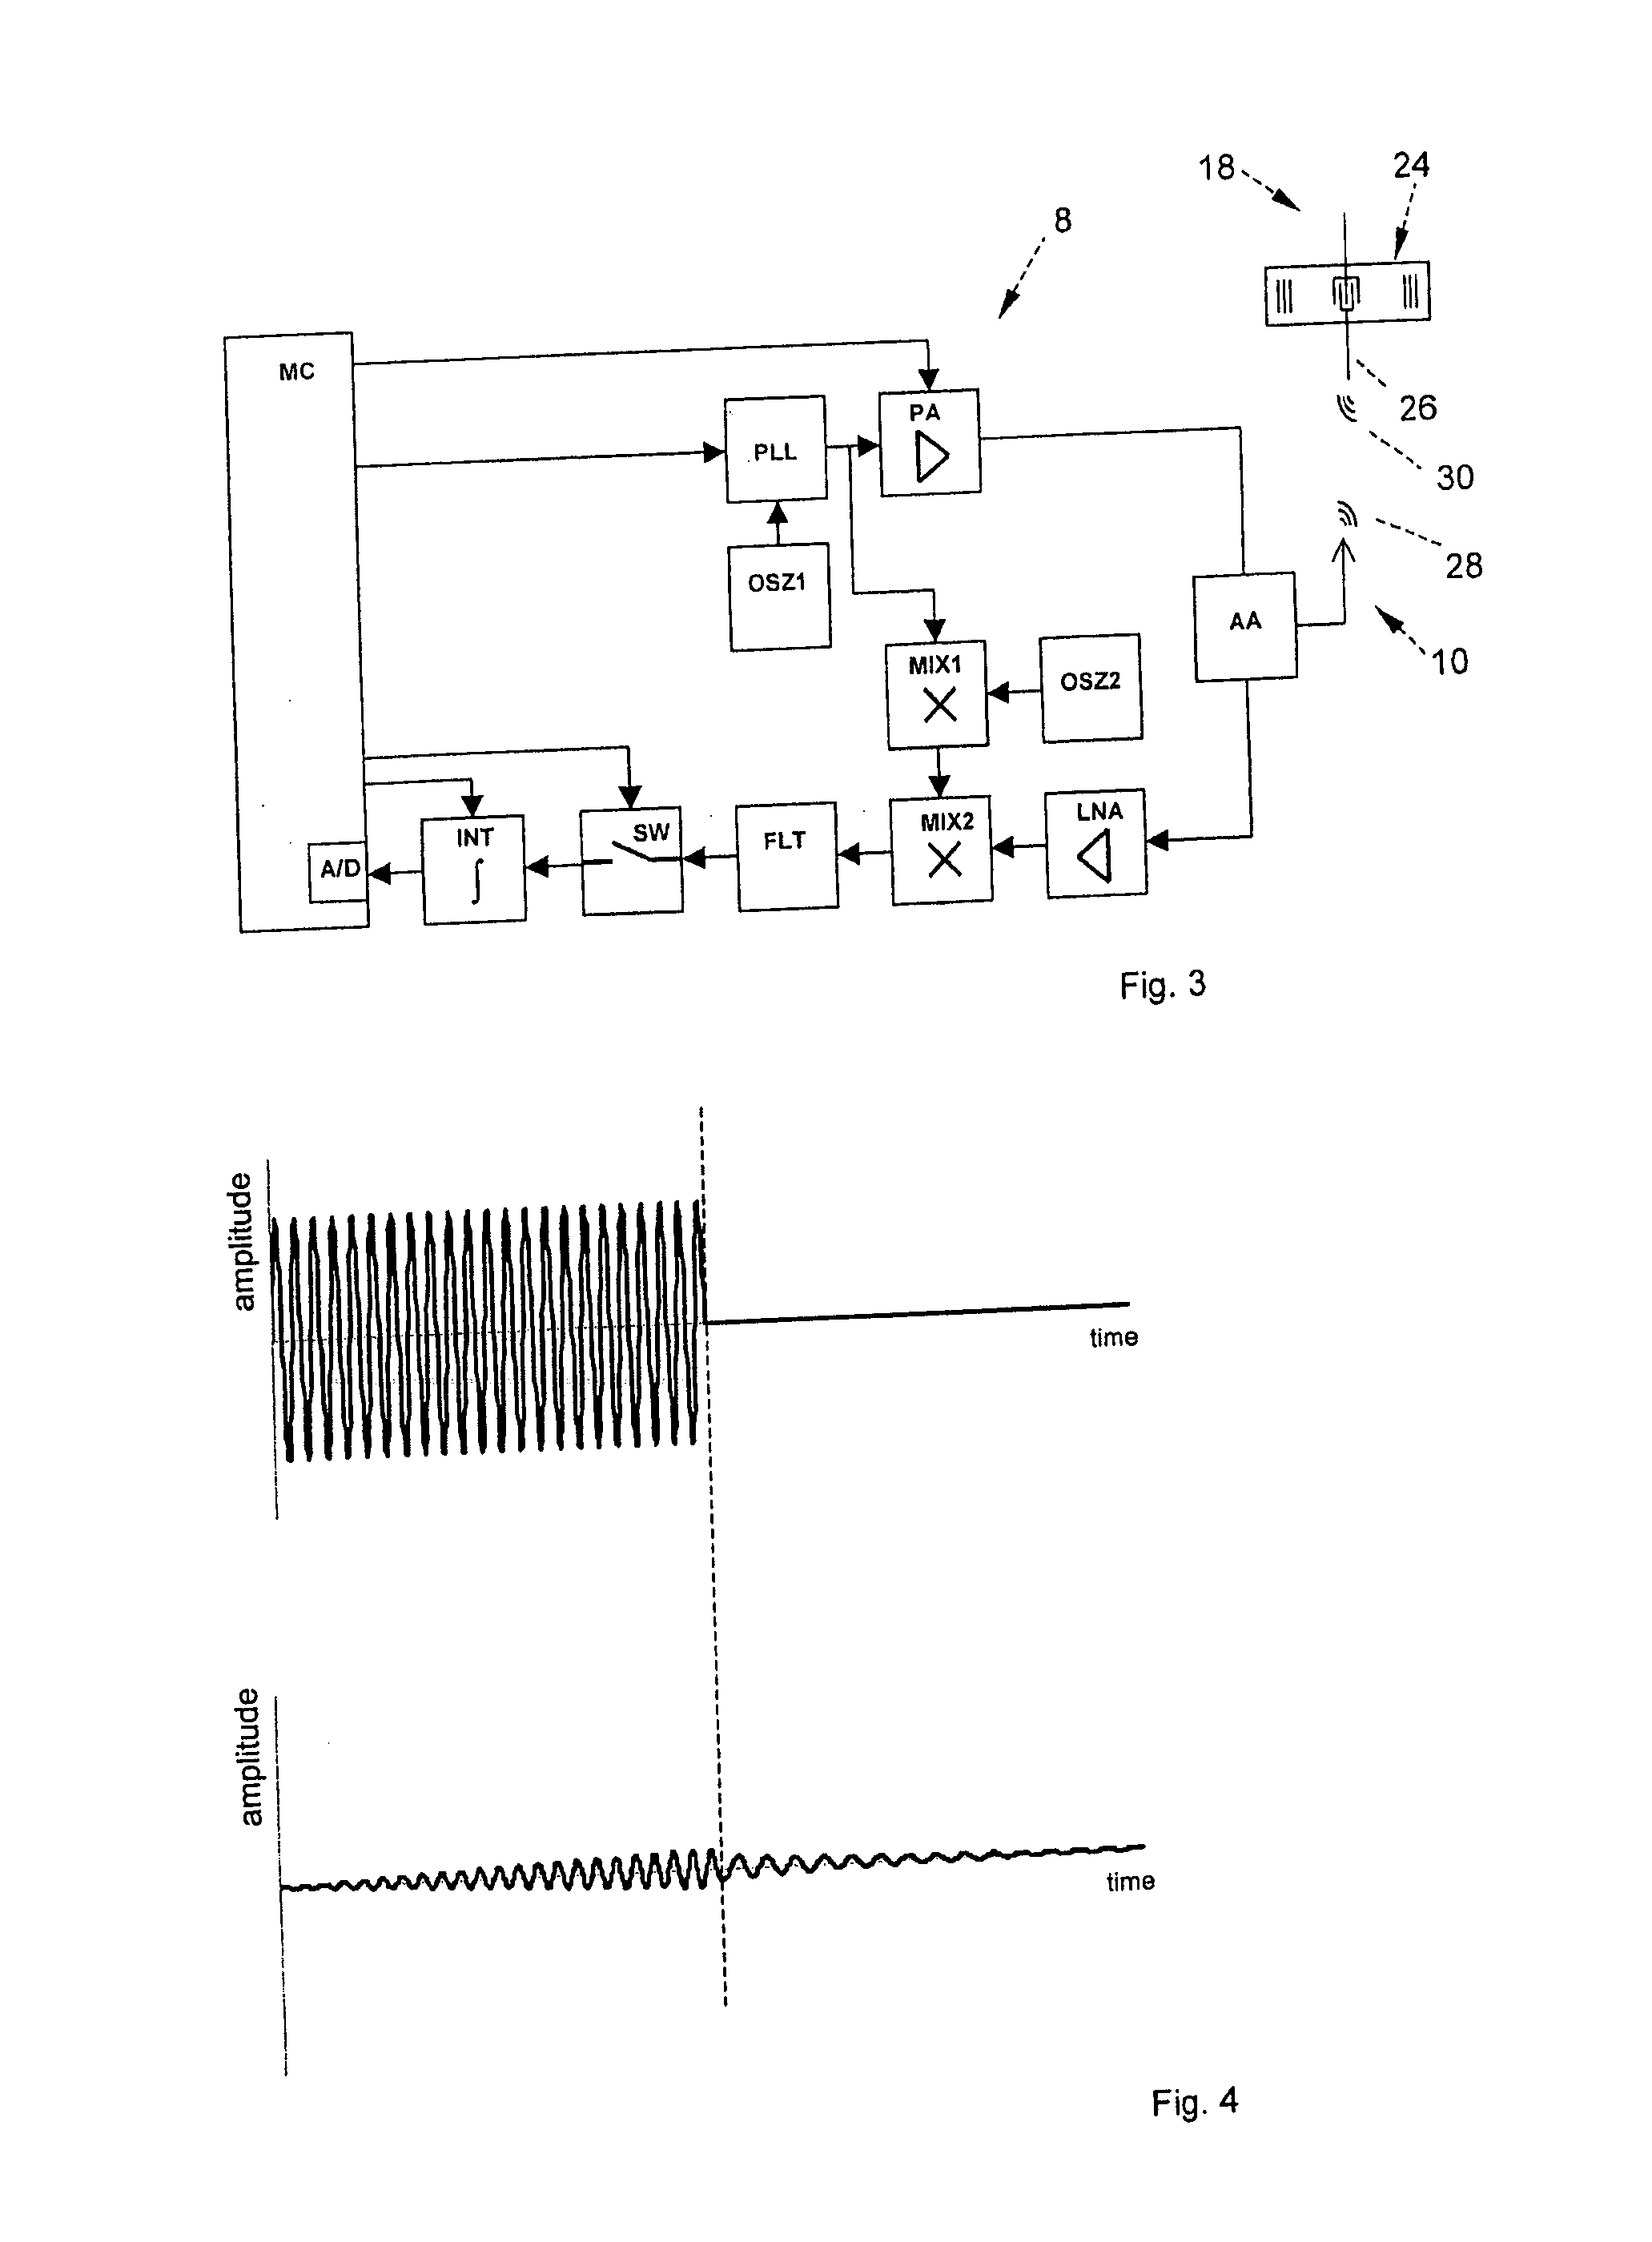 Method for temperature measurement in a household appliance